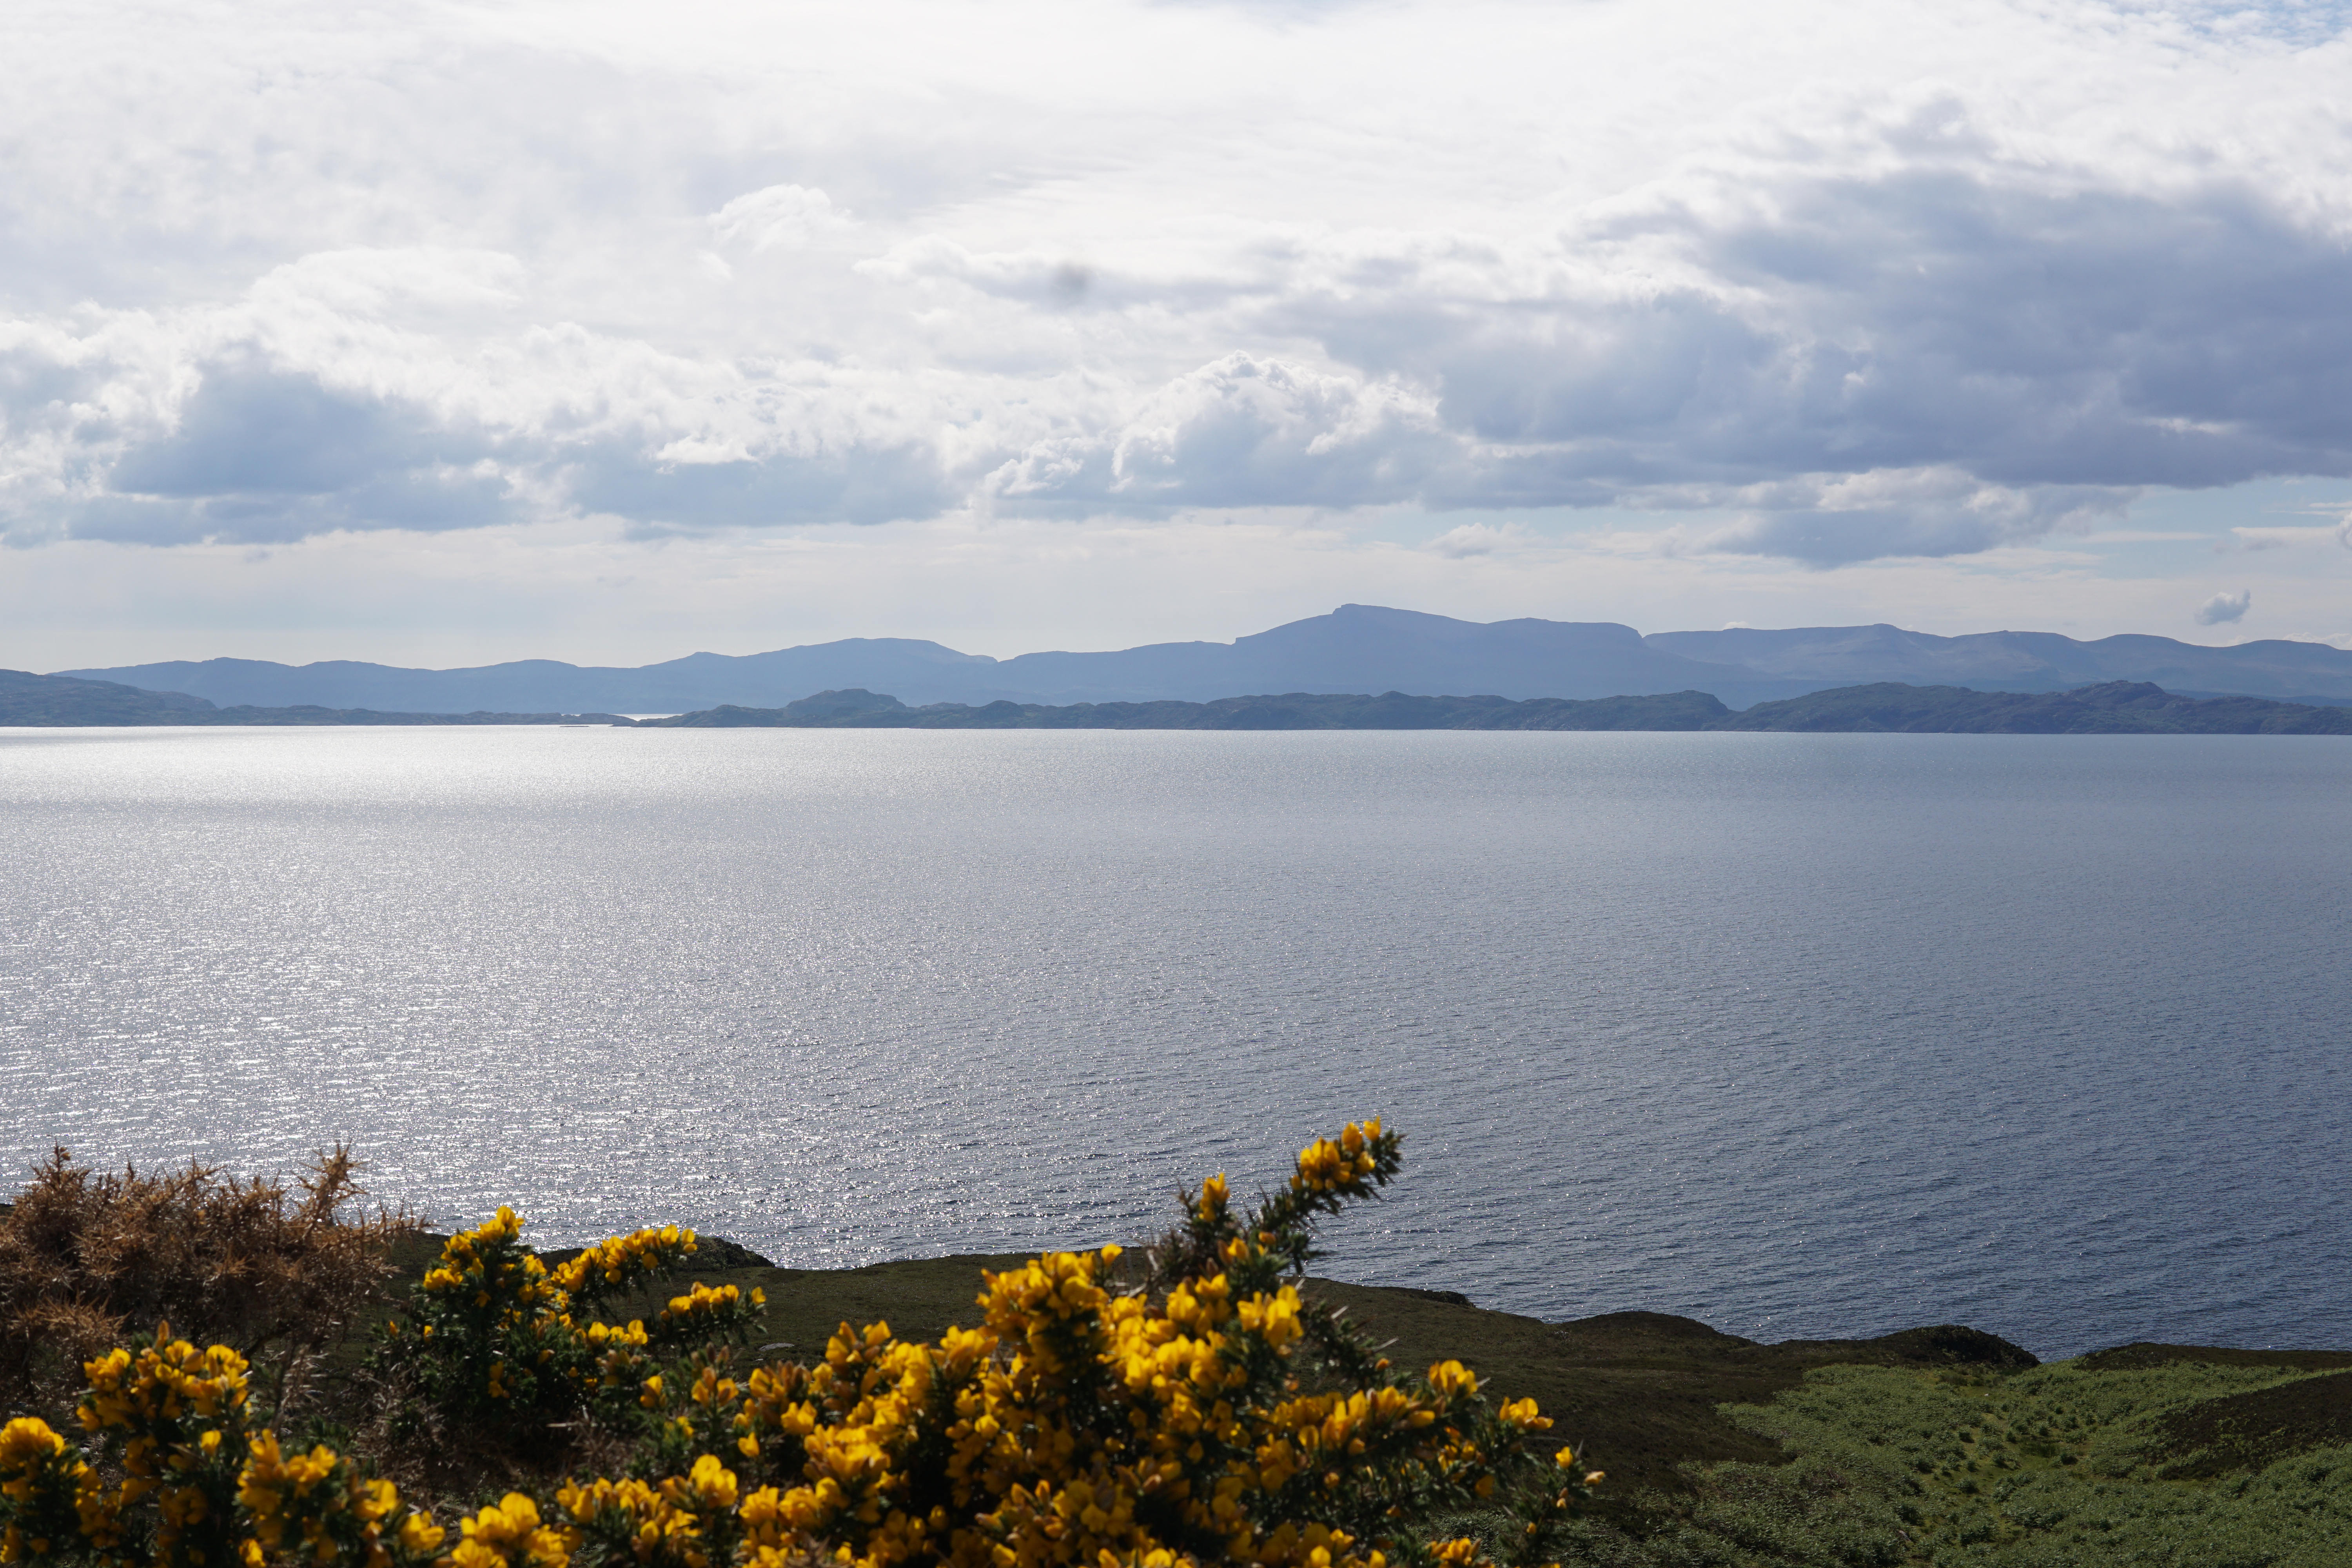 Image looking out to the Isle of Skye, Rona, and Rassay from a layby near Applecross